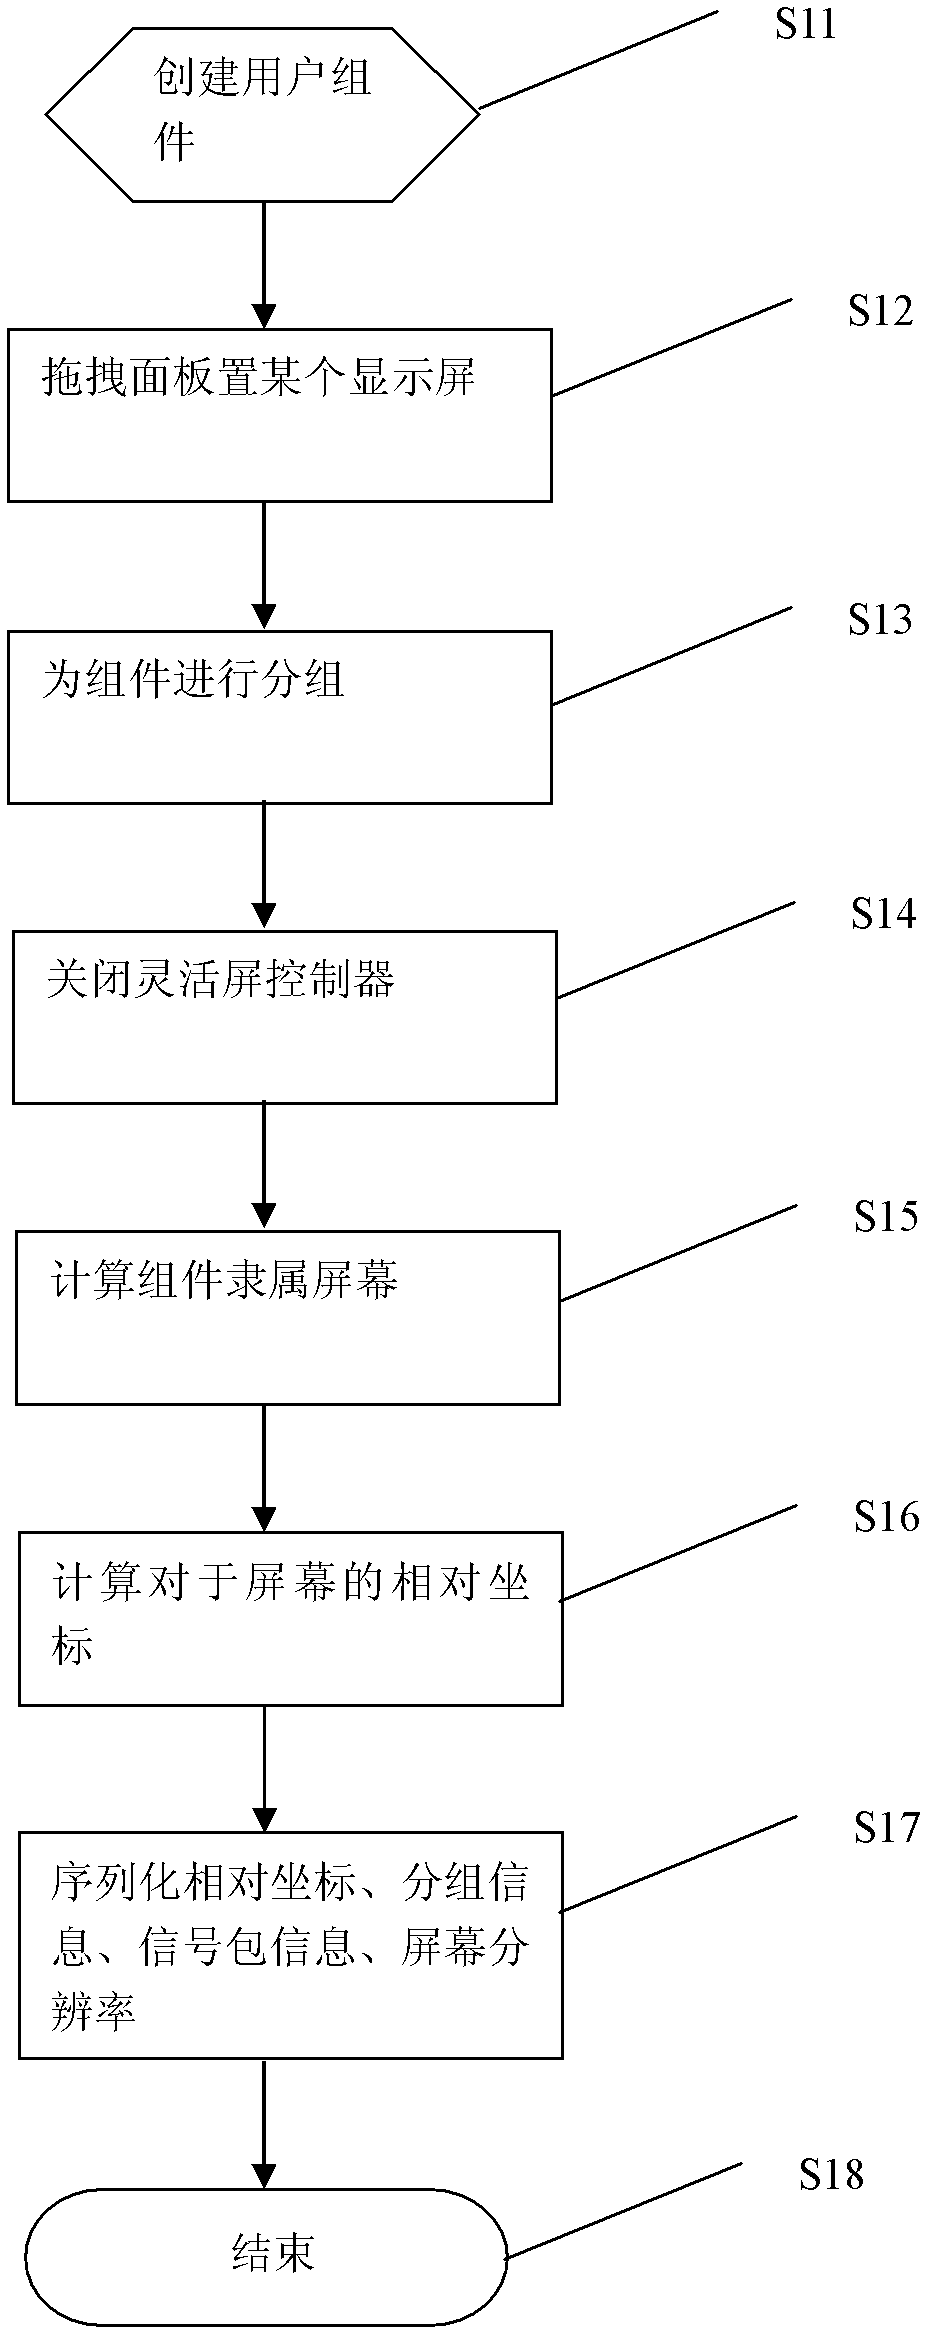 A flexible screen group management system and method